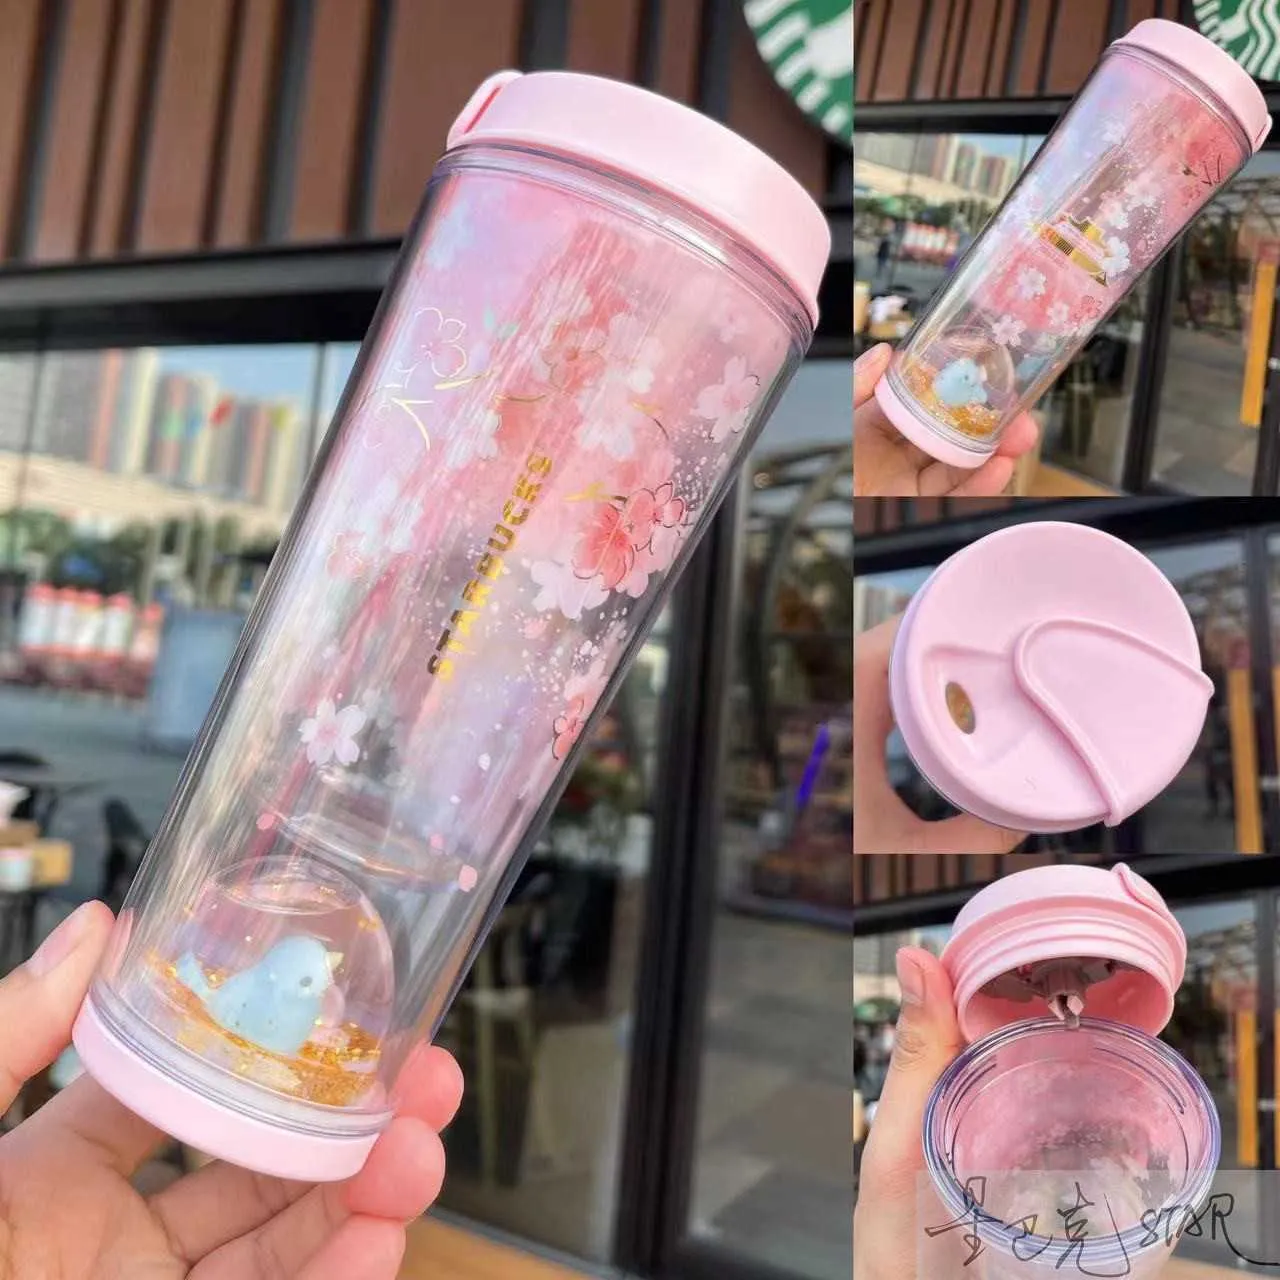 Starbucks Cherry Blossom cup pink 355ml bird singing and flower fragrance plastic accompanying coffee